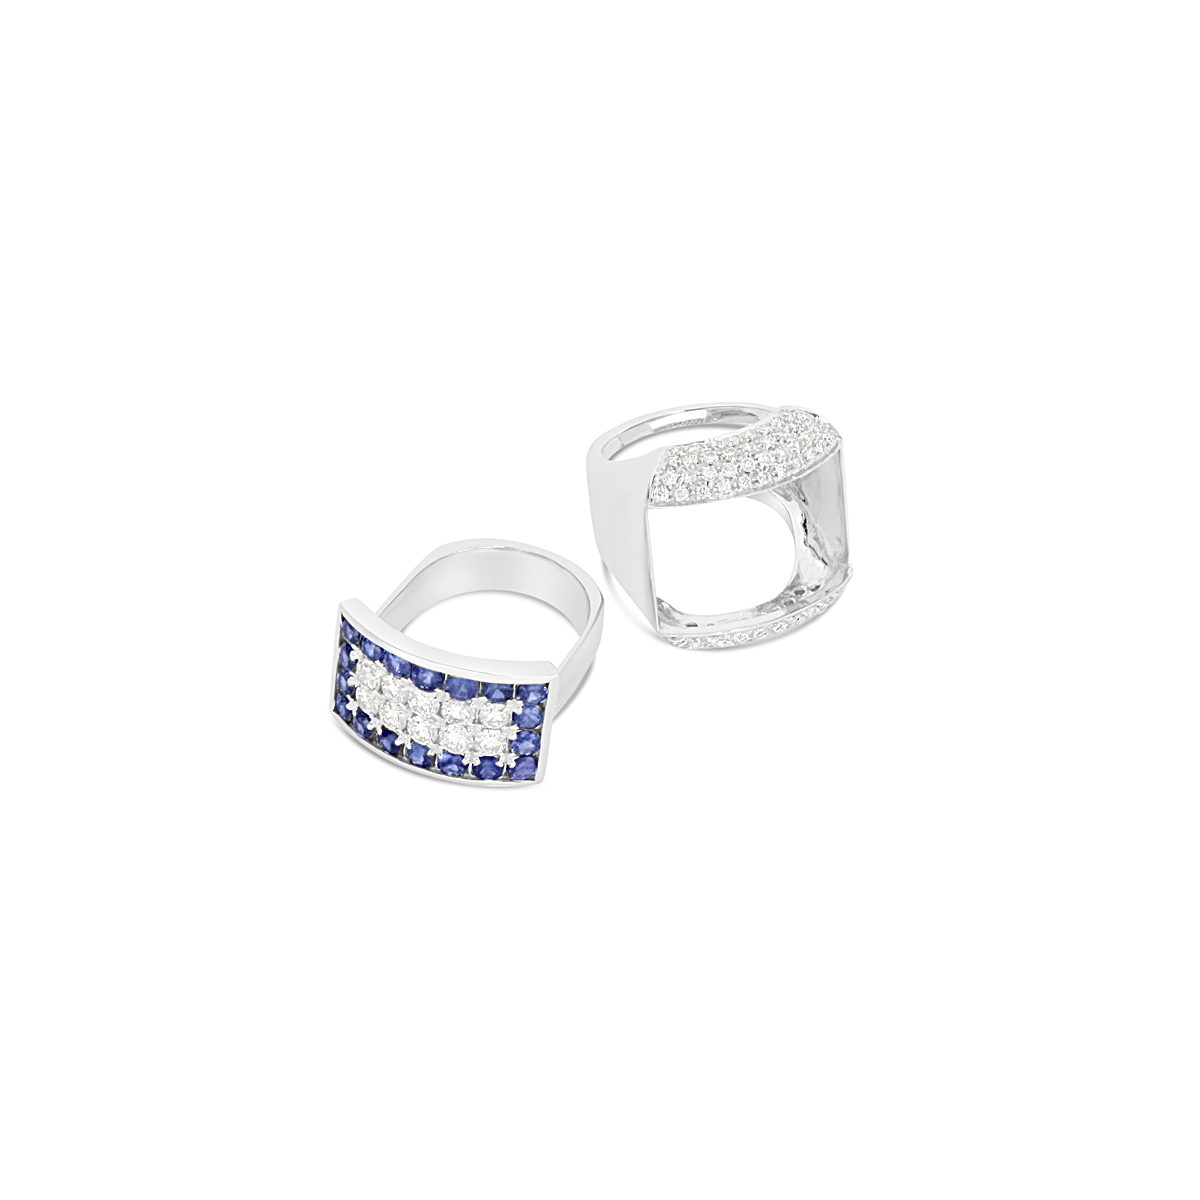 2 in 1 Men's Diamond and Blue Sapphire Ring in 18K White Gold